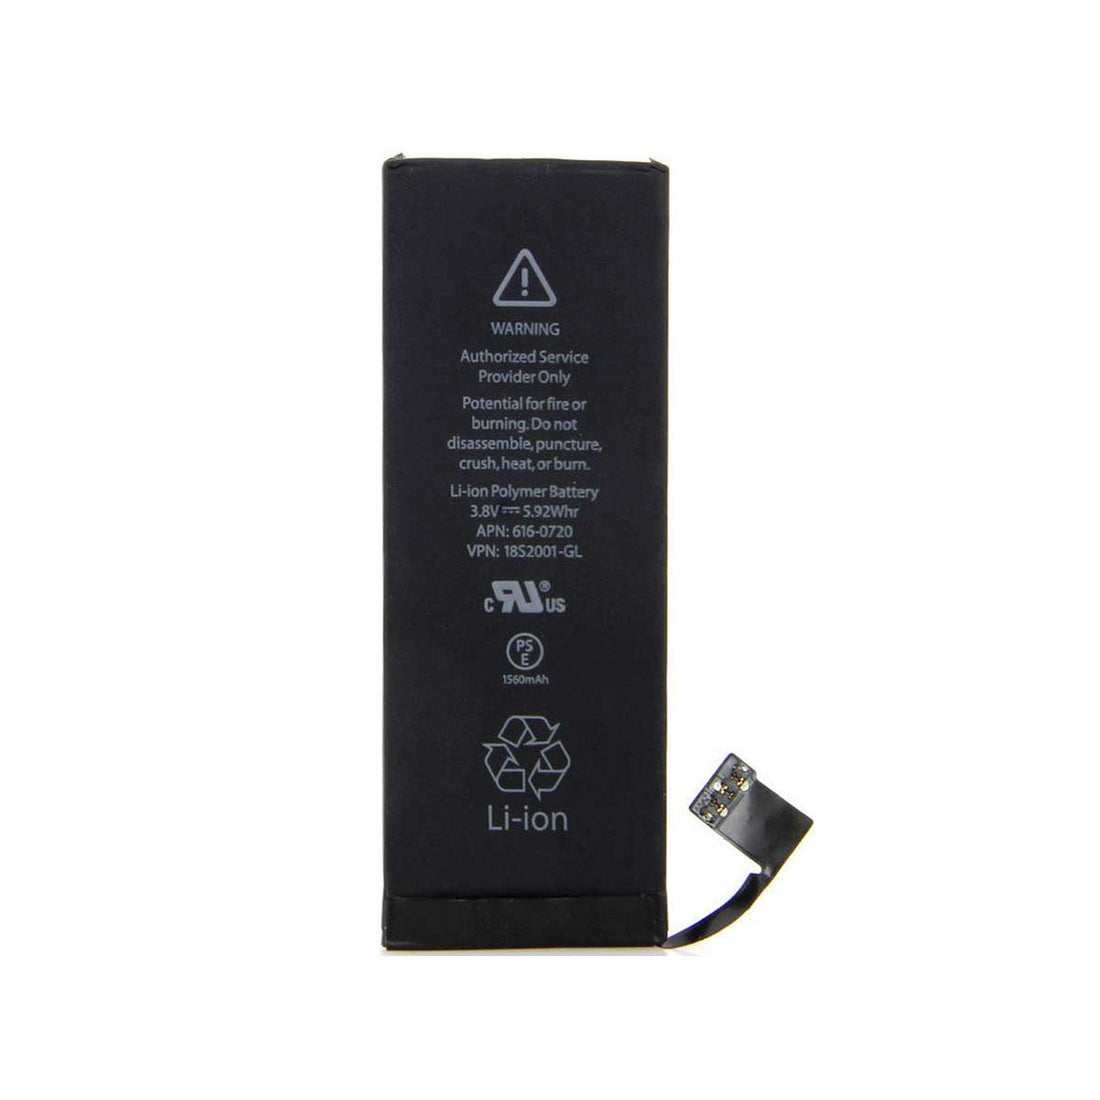 How to replace an iPhone 5s battery guide